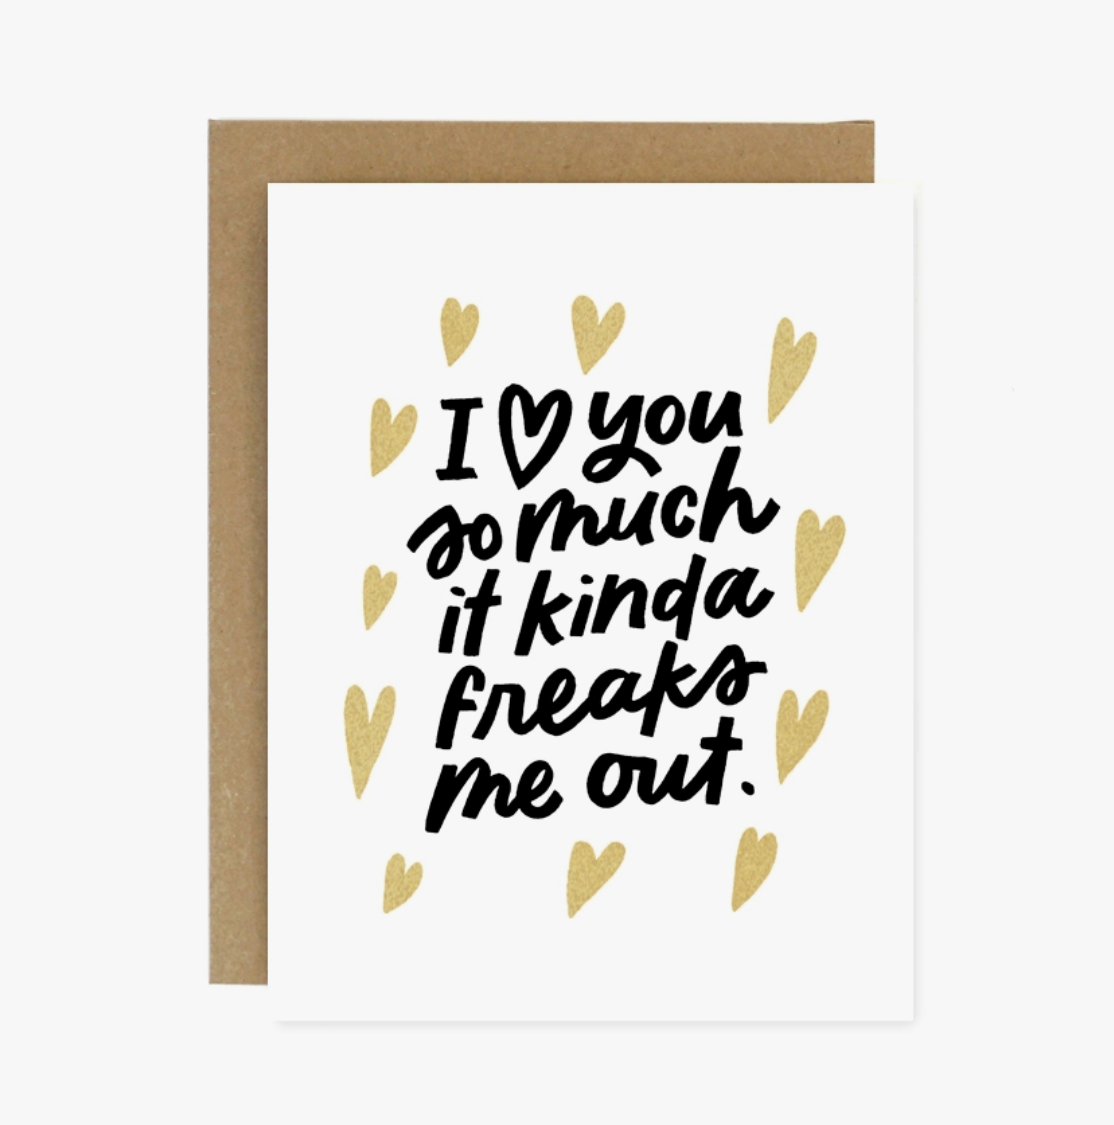 •FREAKS ME OUT• love card